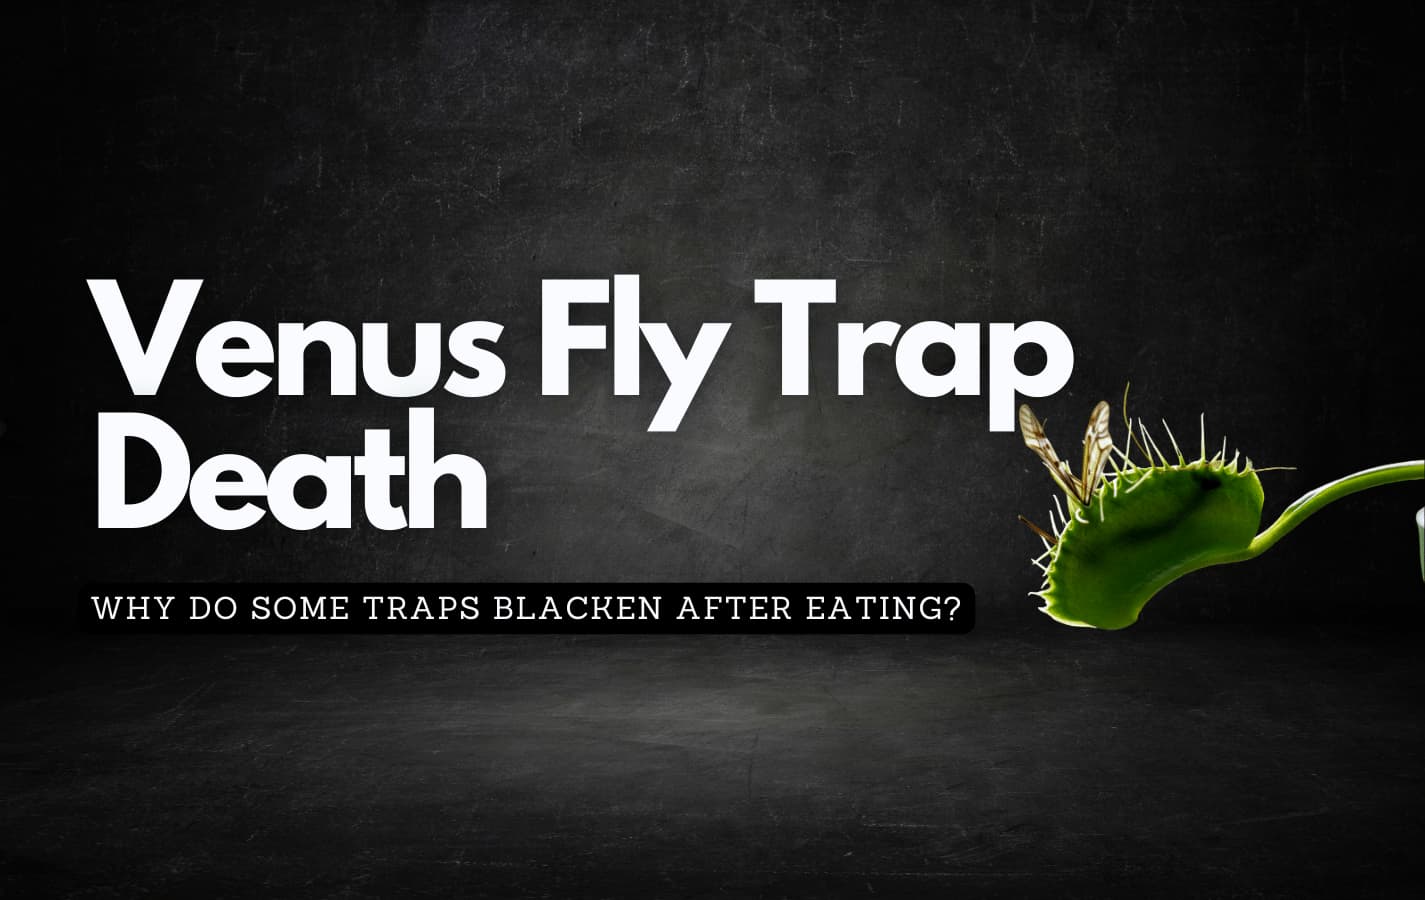 Why Does My Venus Fly Trap Turn Black After Eating? Find Out Here!